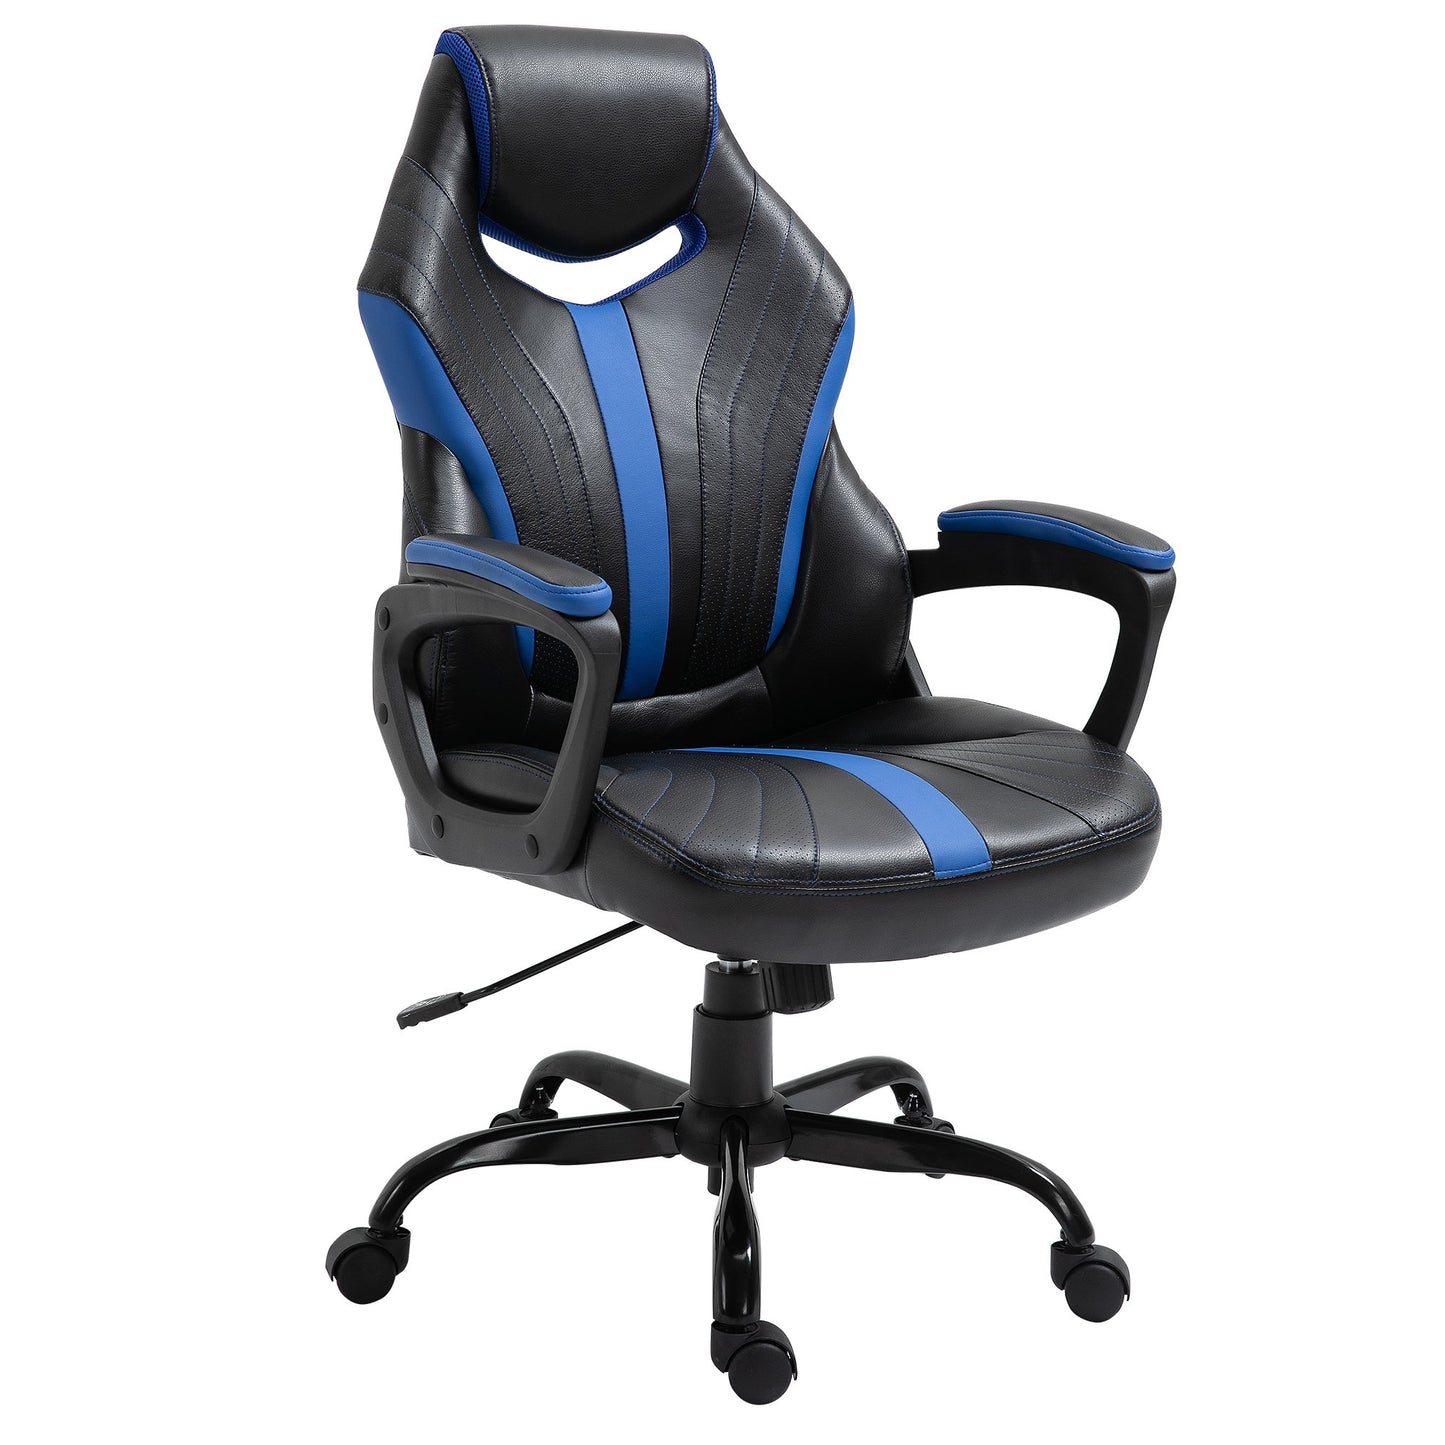 Vinsetto Computer Gaming Chair Swivel Home Office Computer Racing Gamer Chair w/ Wheels, Black Blue